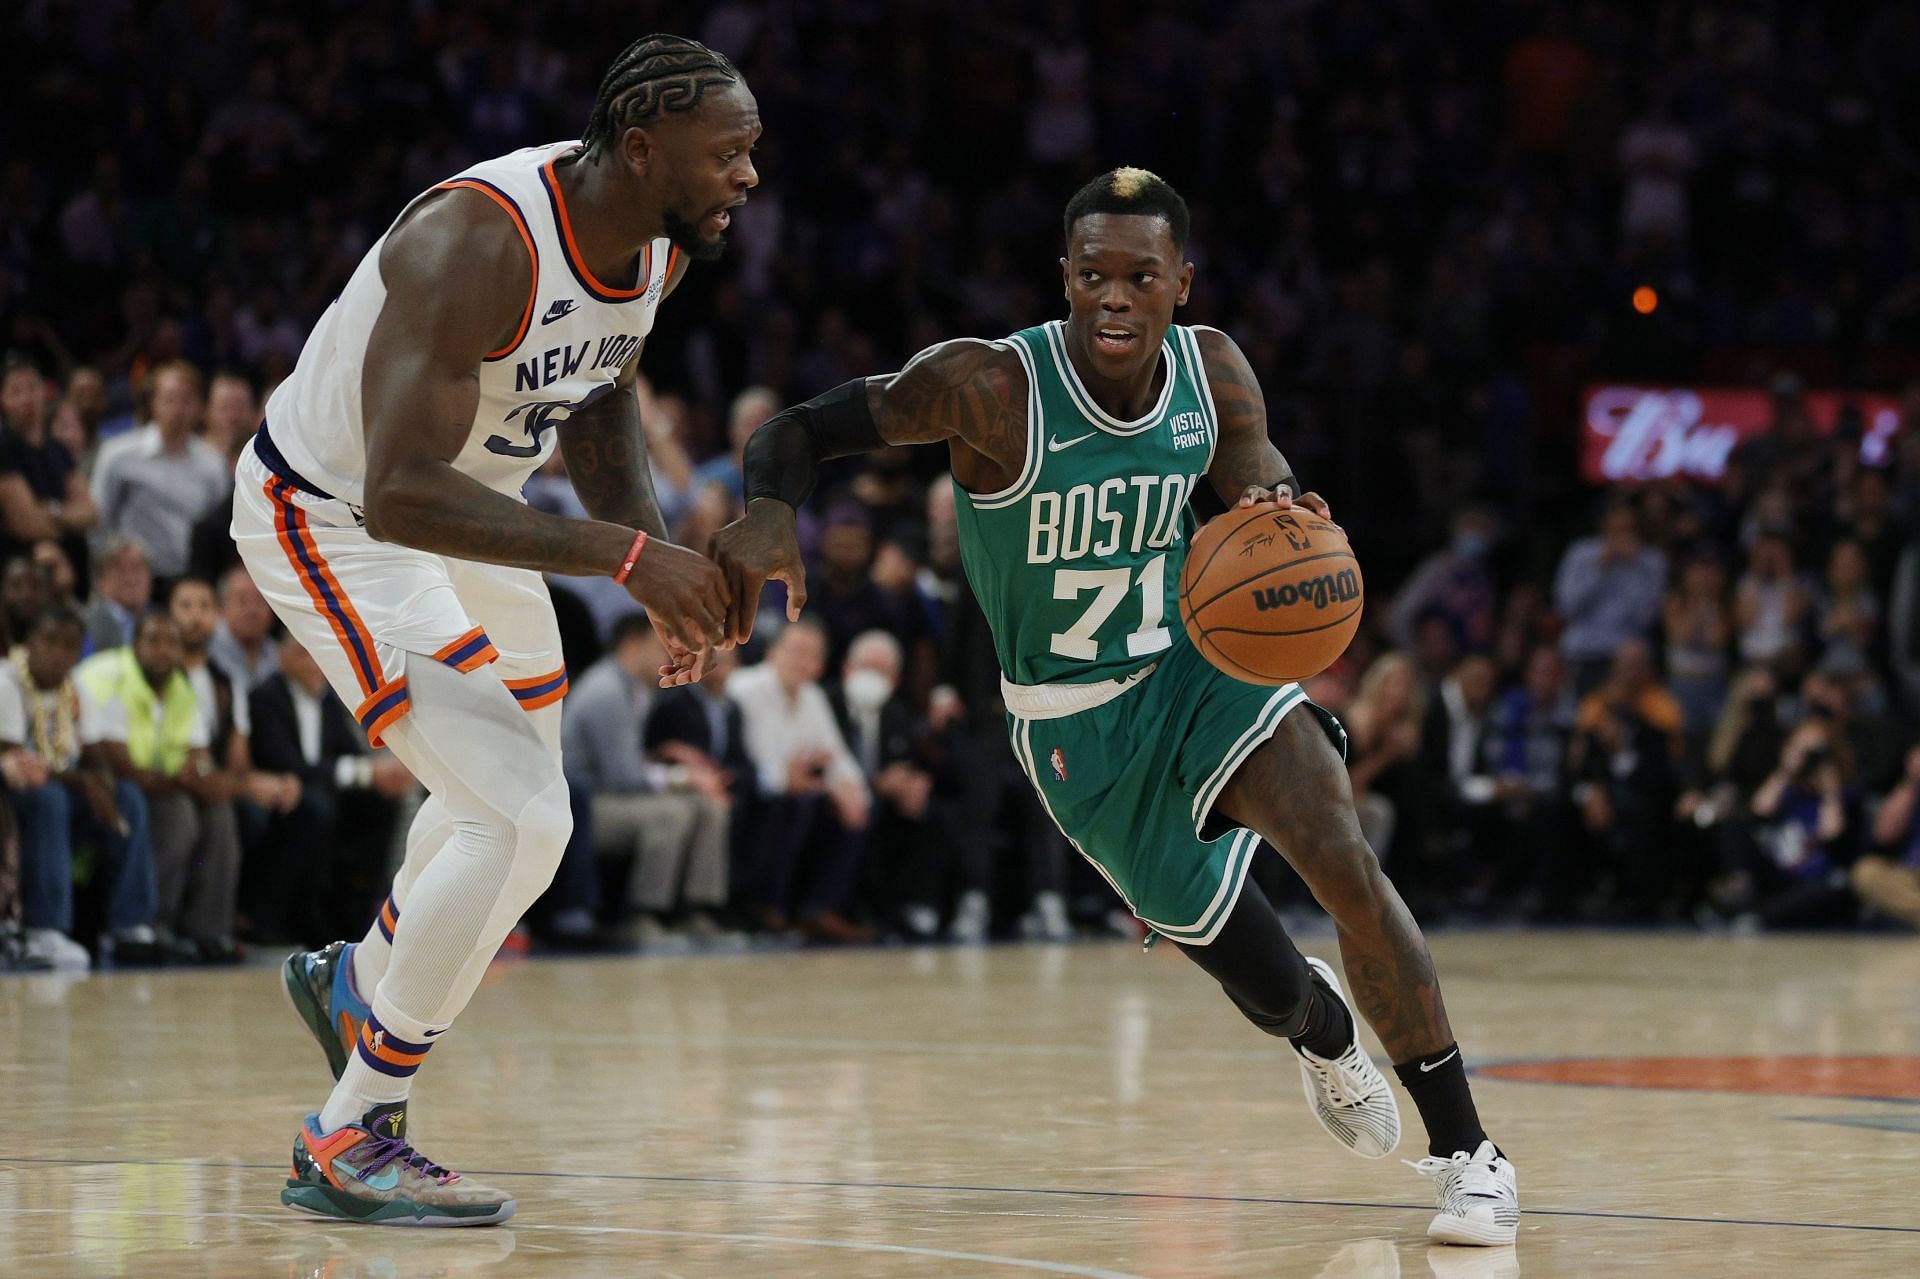 Dennis Schroder #71 of the Boston Celtics dribbles as Julius Randle #30 of the New York Knicks defends